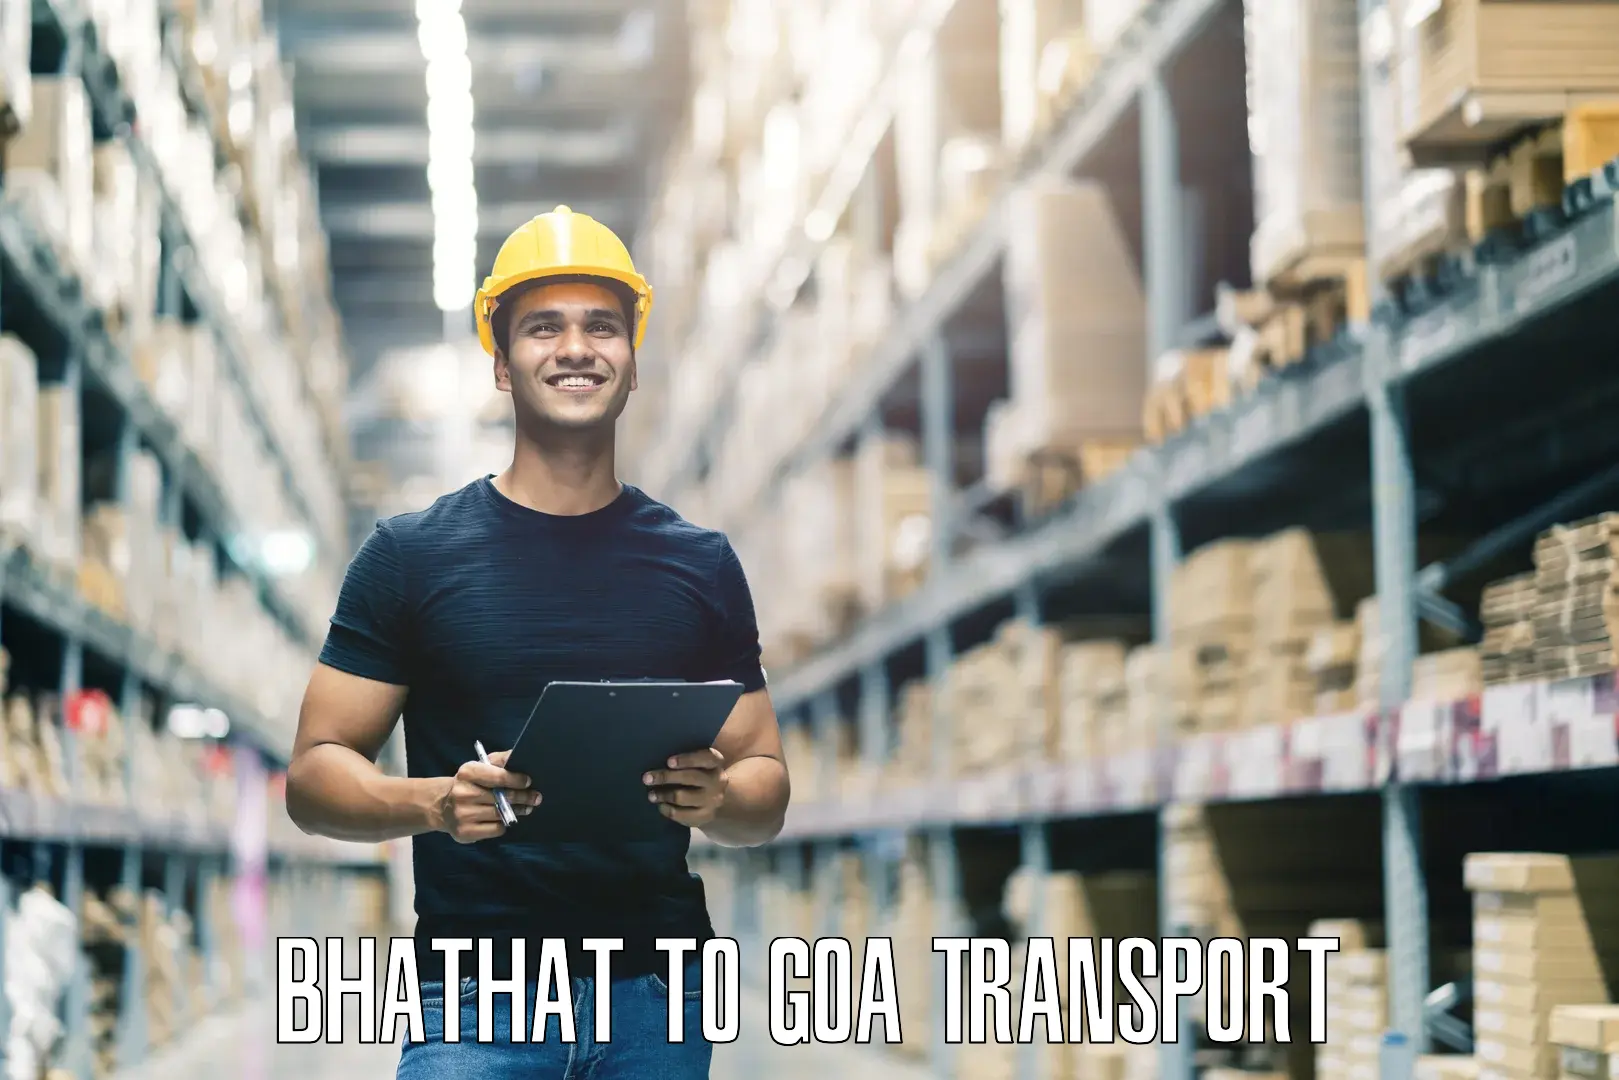 Scooty transport charges Bhathat to South Goa